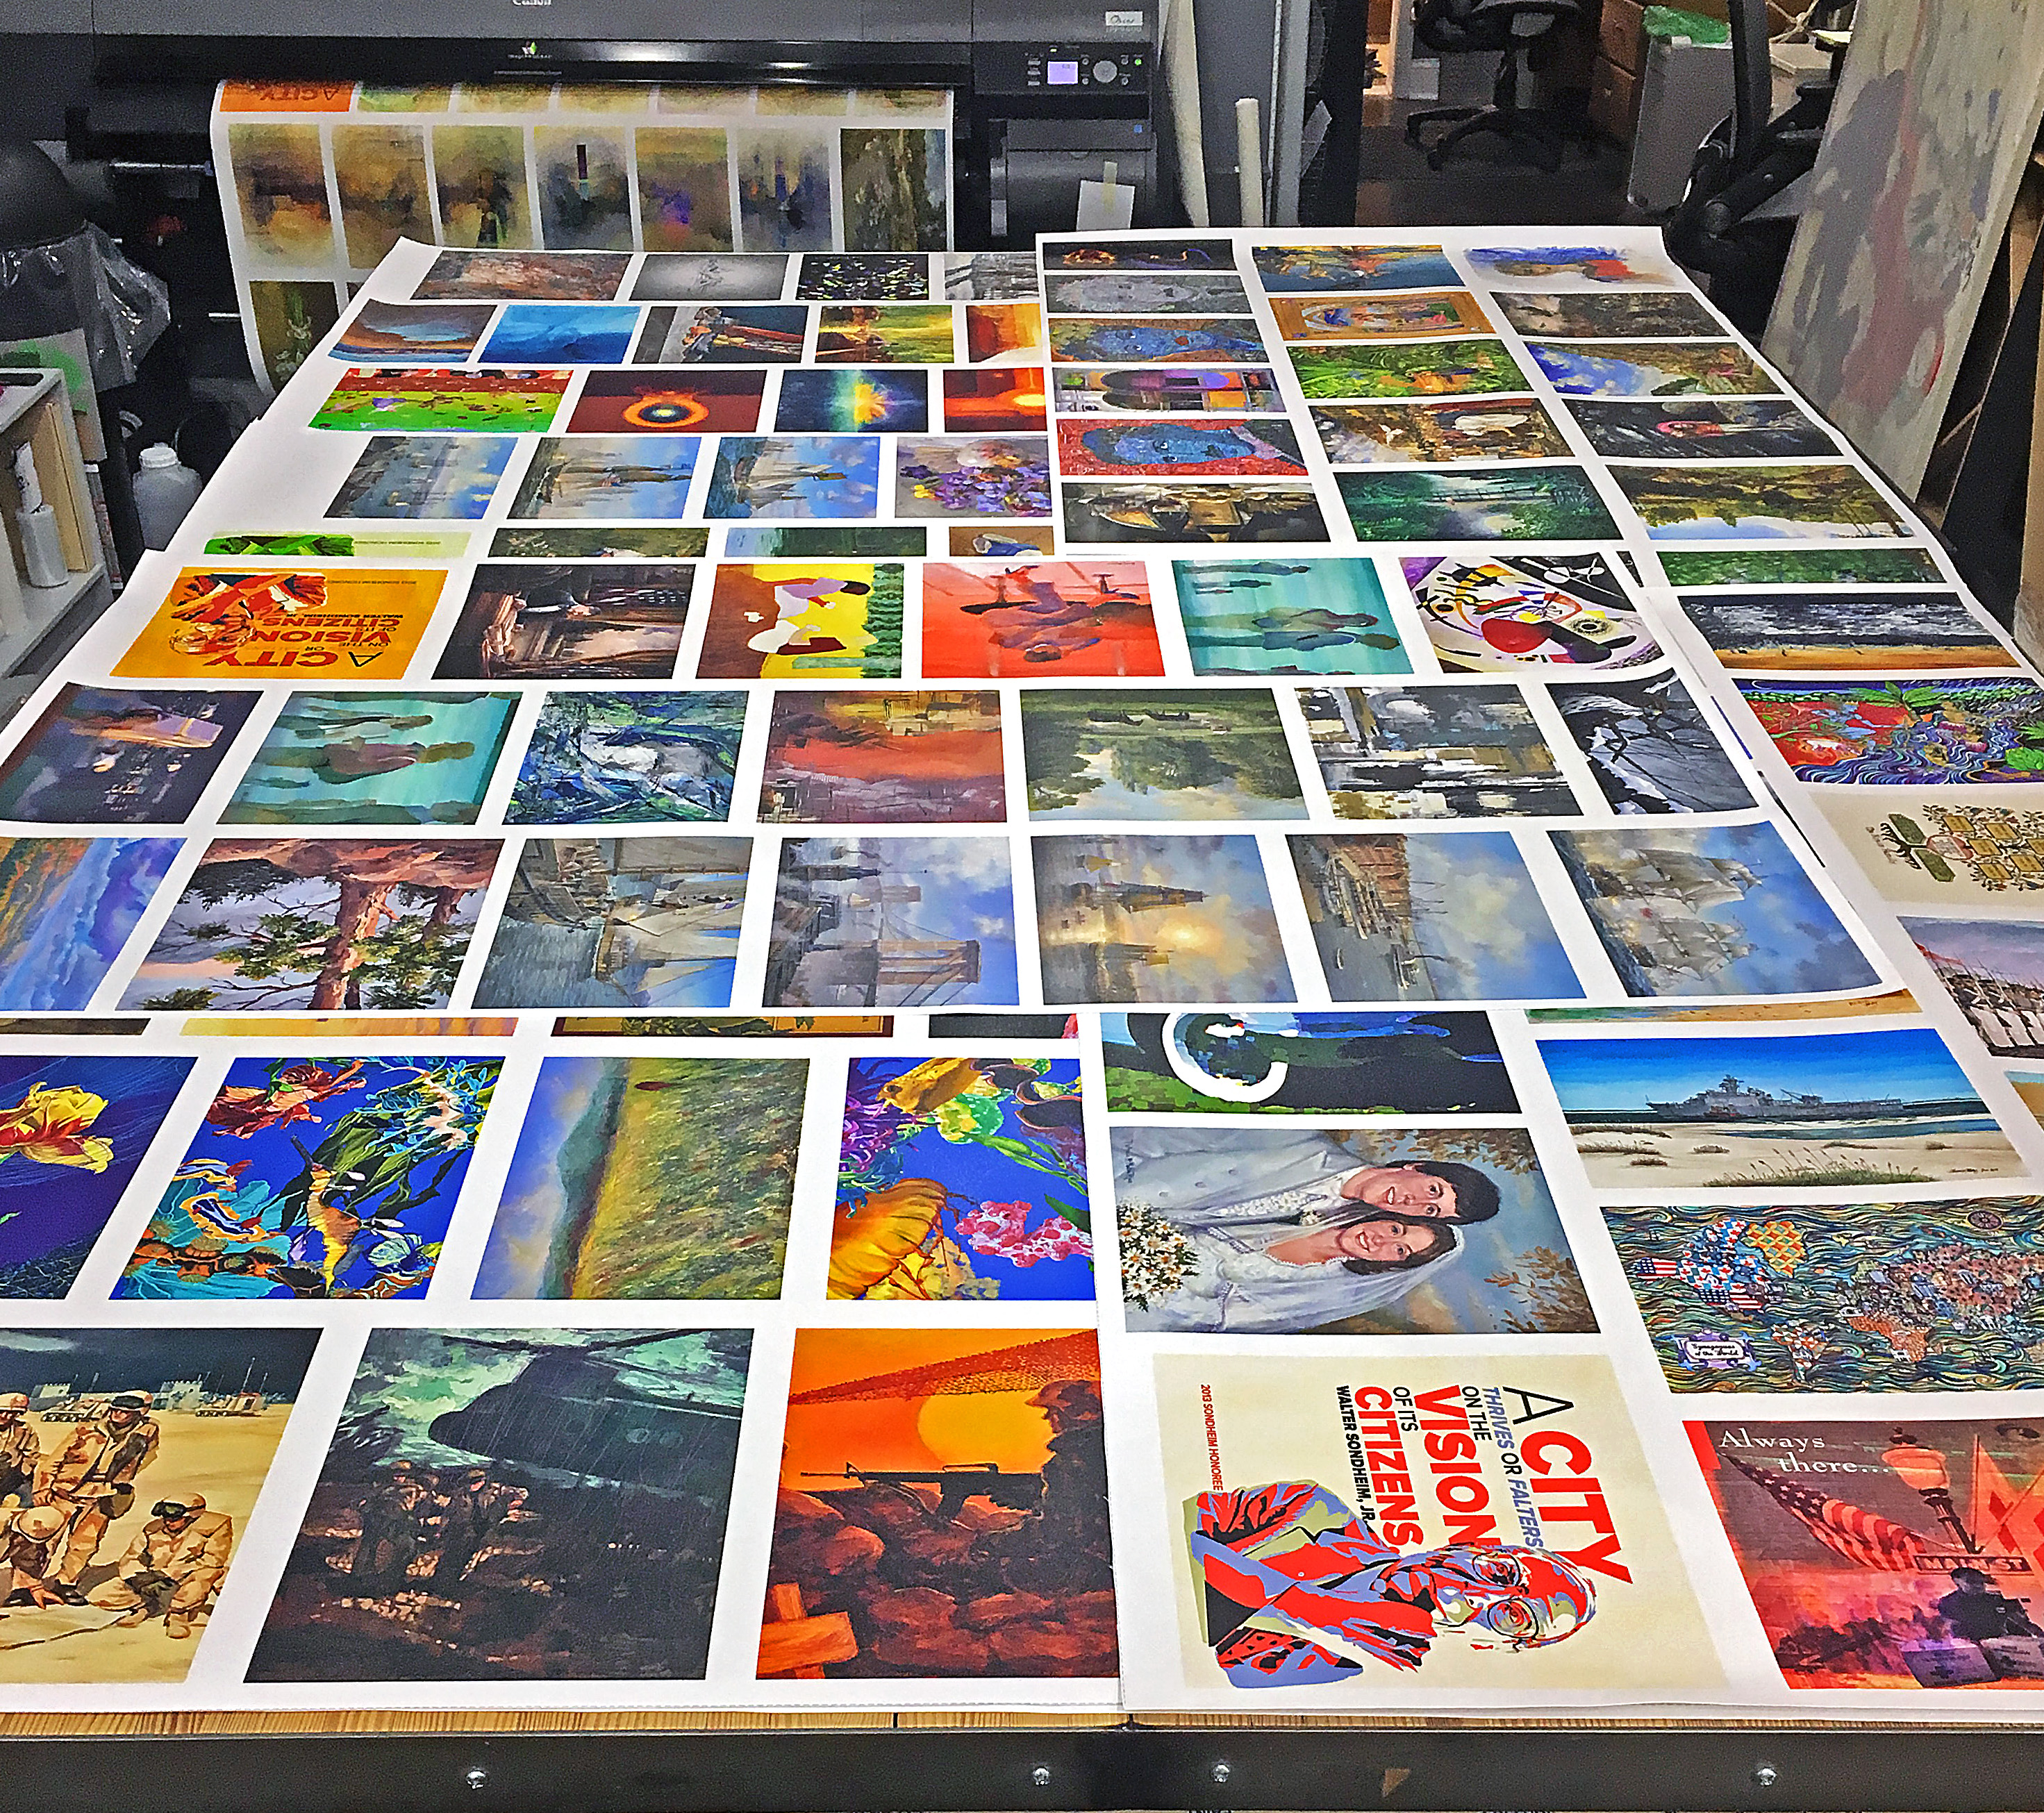 Quality printmaking requires color control - table full of proofs for color reference